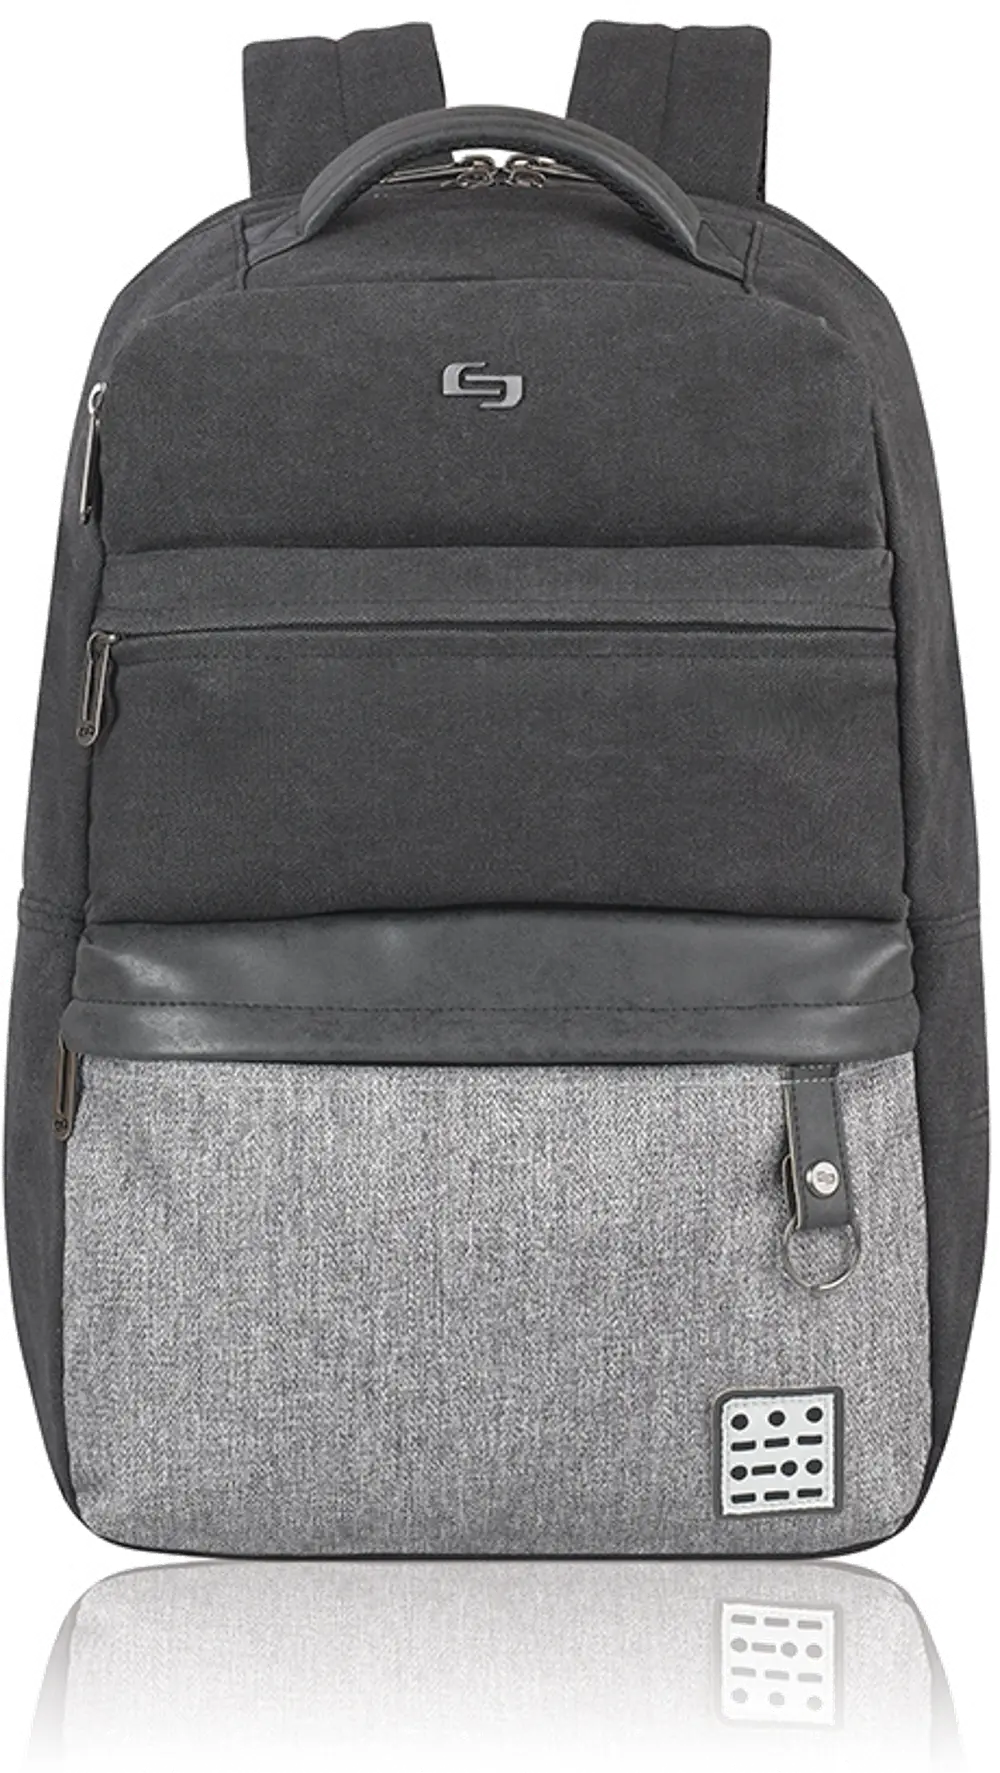 UBN740-4 15.6 Inch Gray and Black Backpack-1